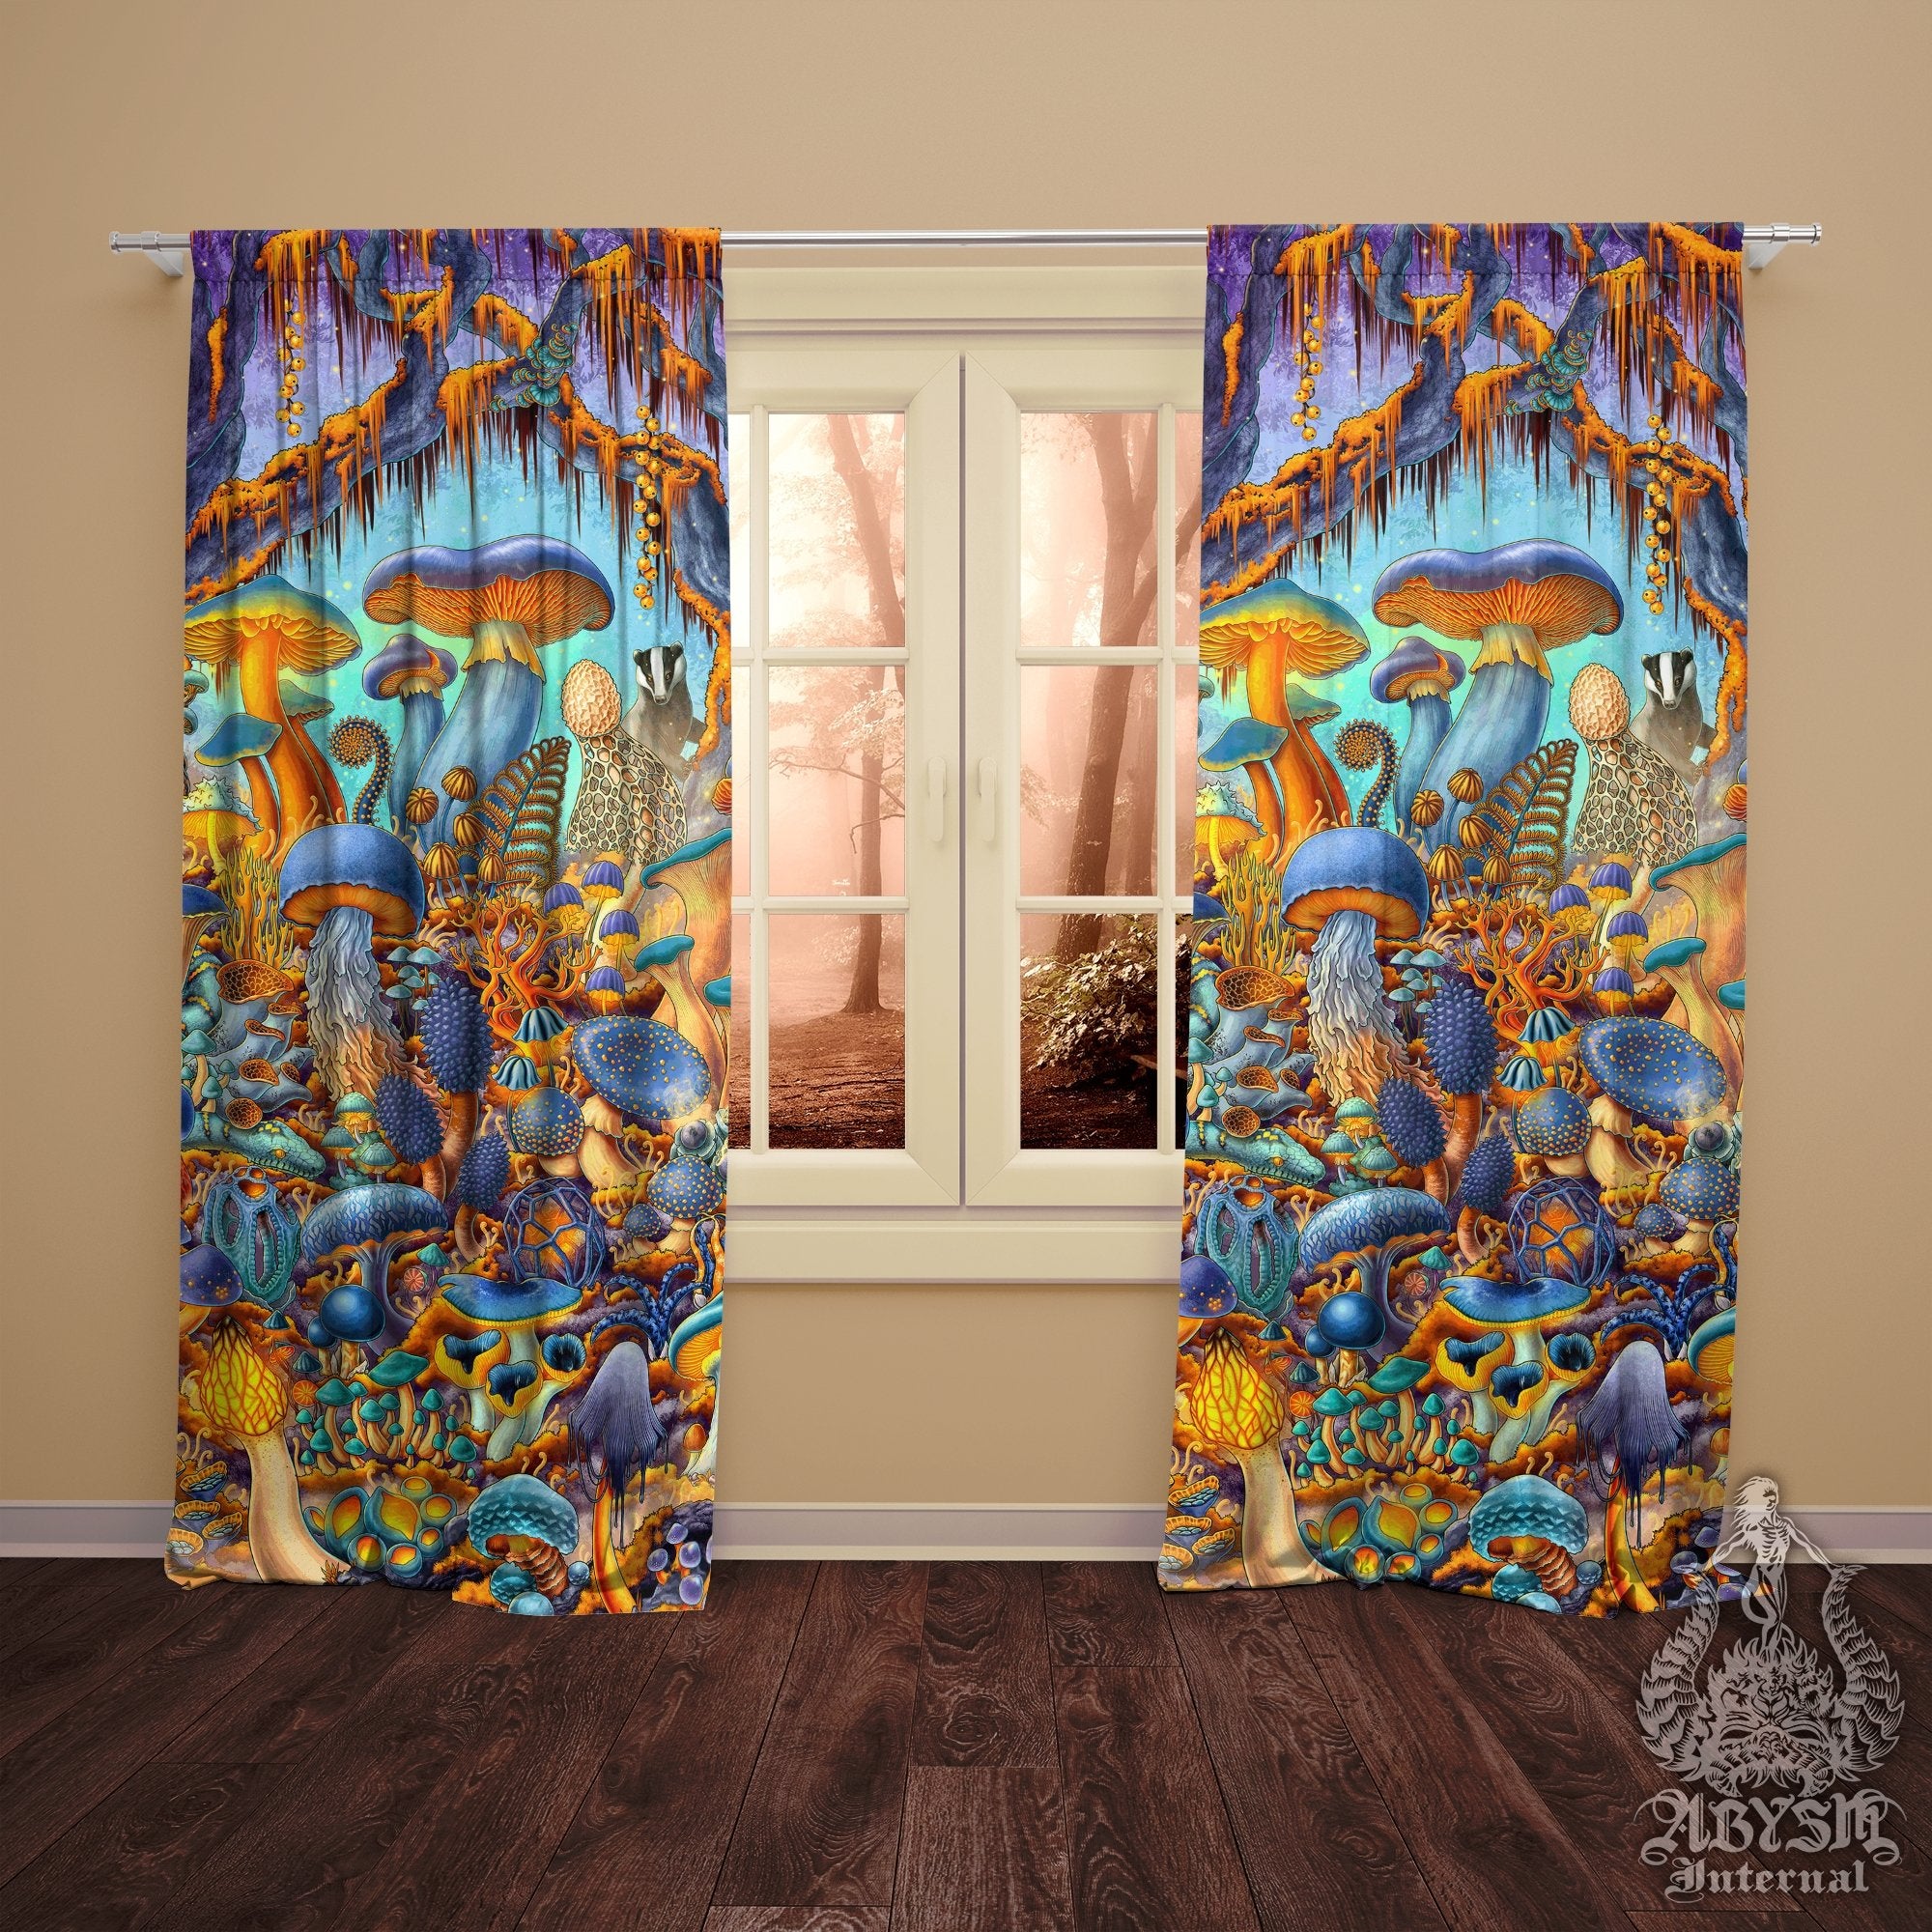 Mushrooms Blackout Curtains, Long Window Panels, Micology Art Print, Indie Shop, Home and Kids Room Decor - Magic Shrooms, Cyan and Gold - Abysm Internal